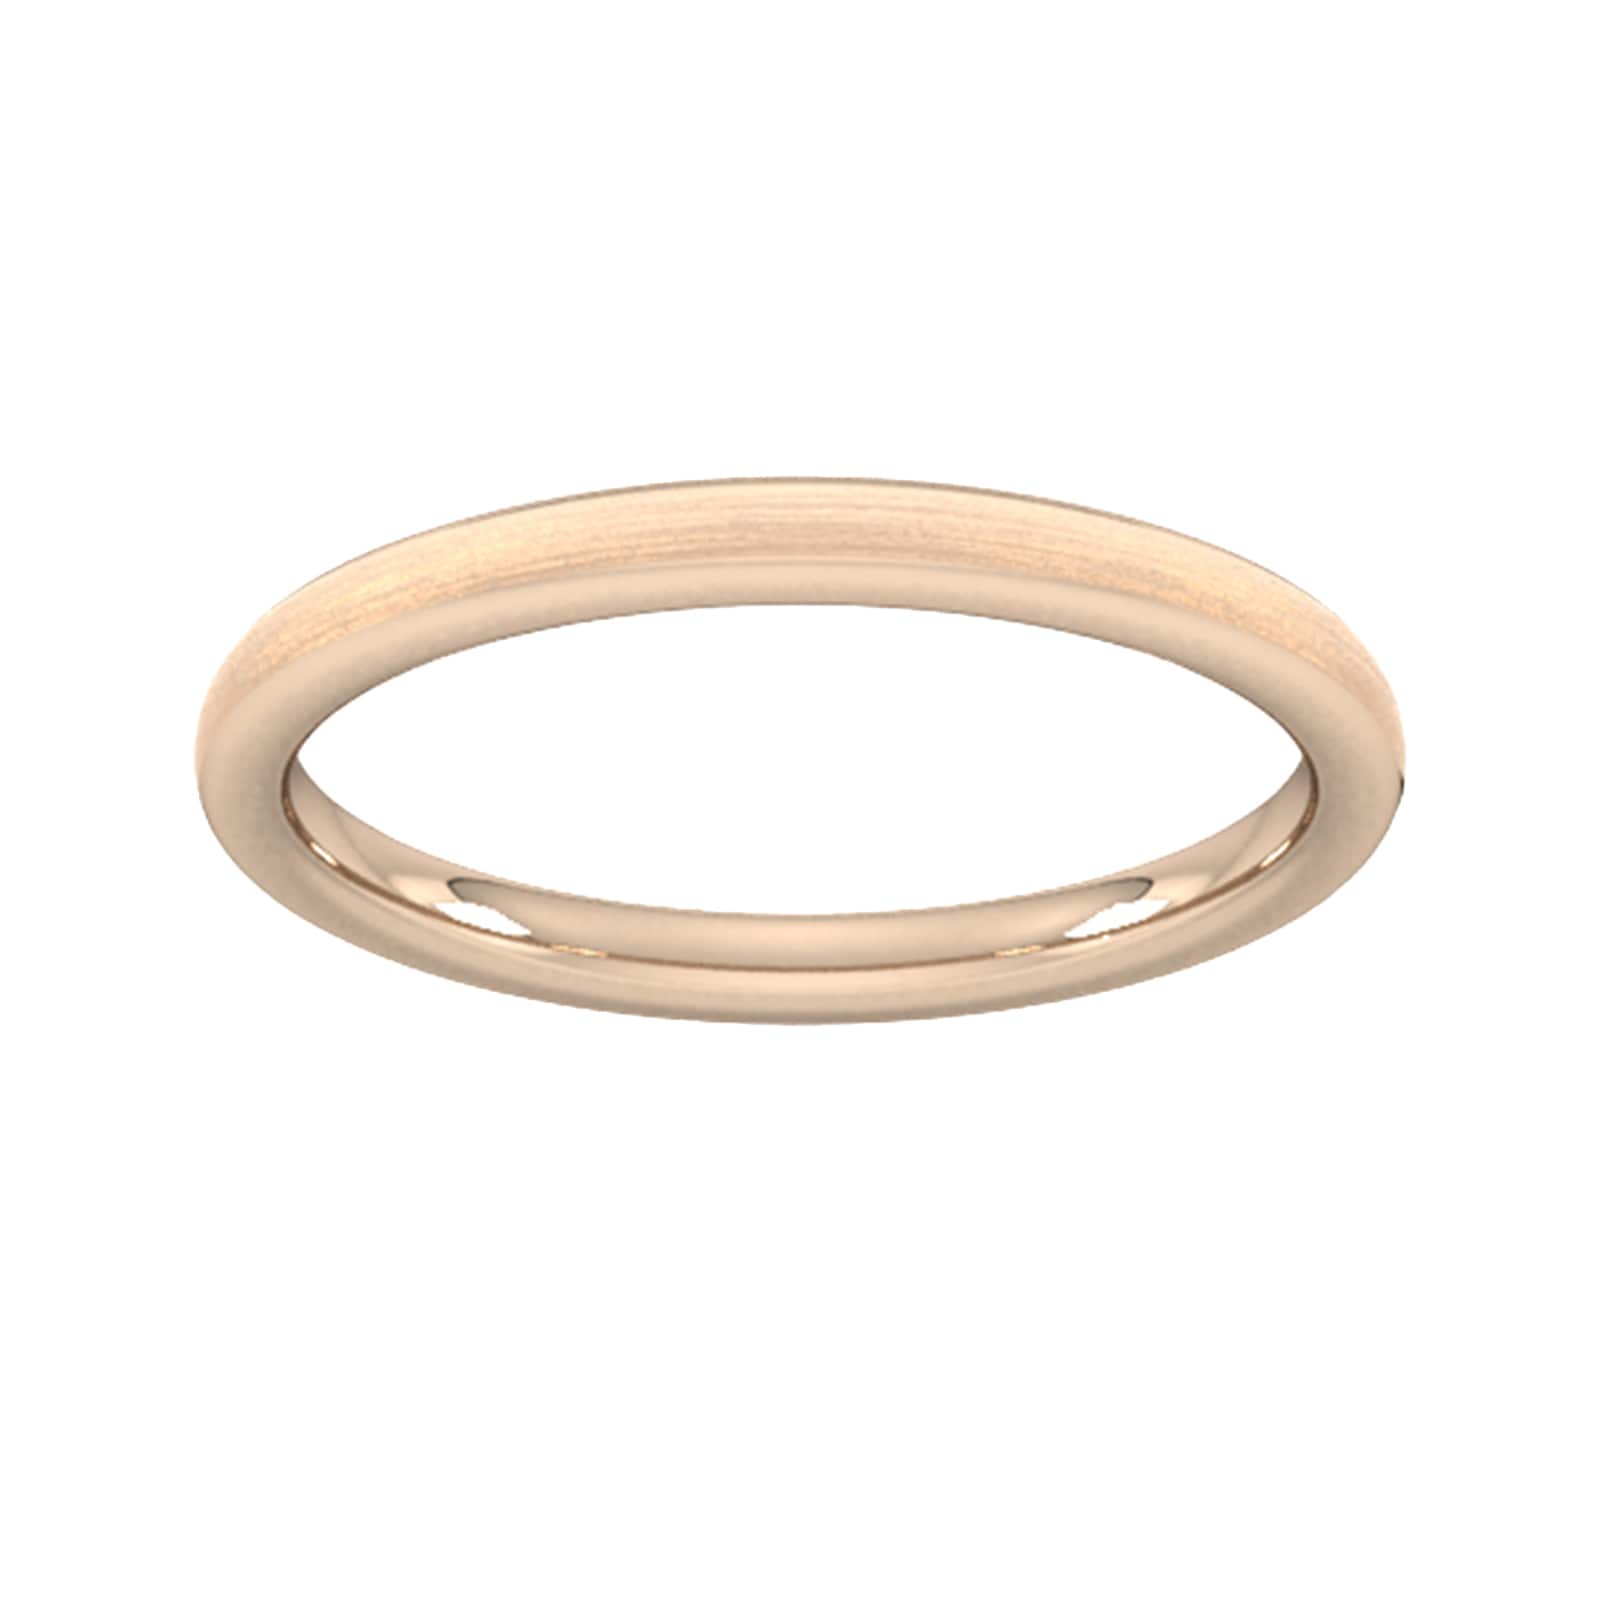 2mm Flat Court Heavy Matt Finished Wedding Ring In 9 Carat Rose Gold - Ring Size R